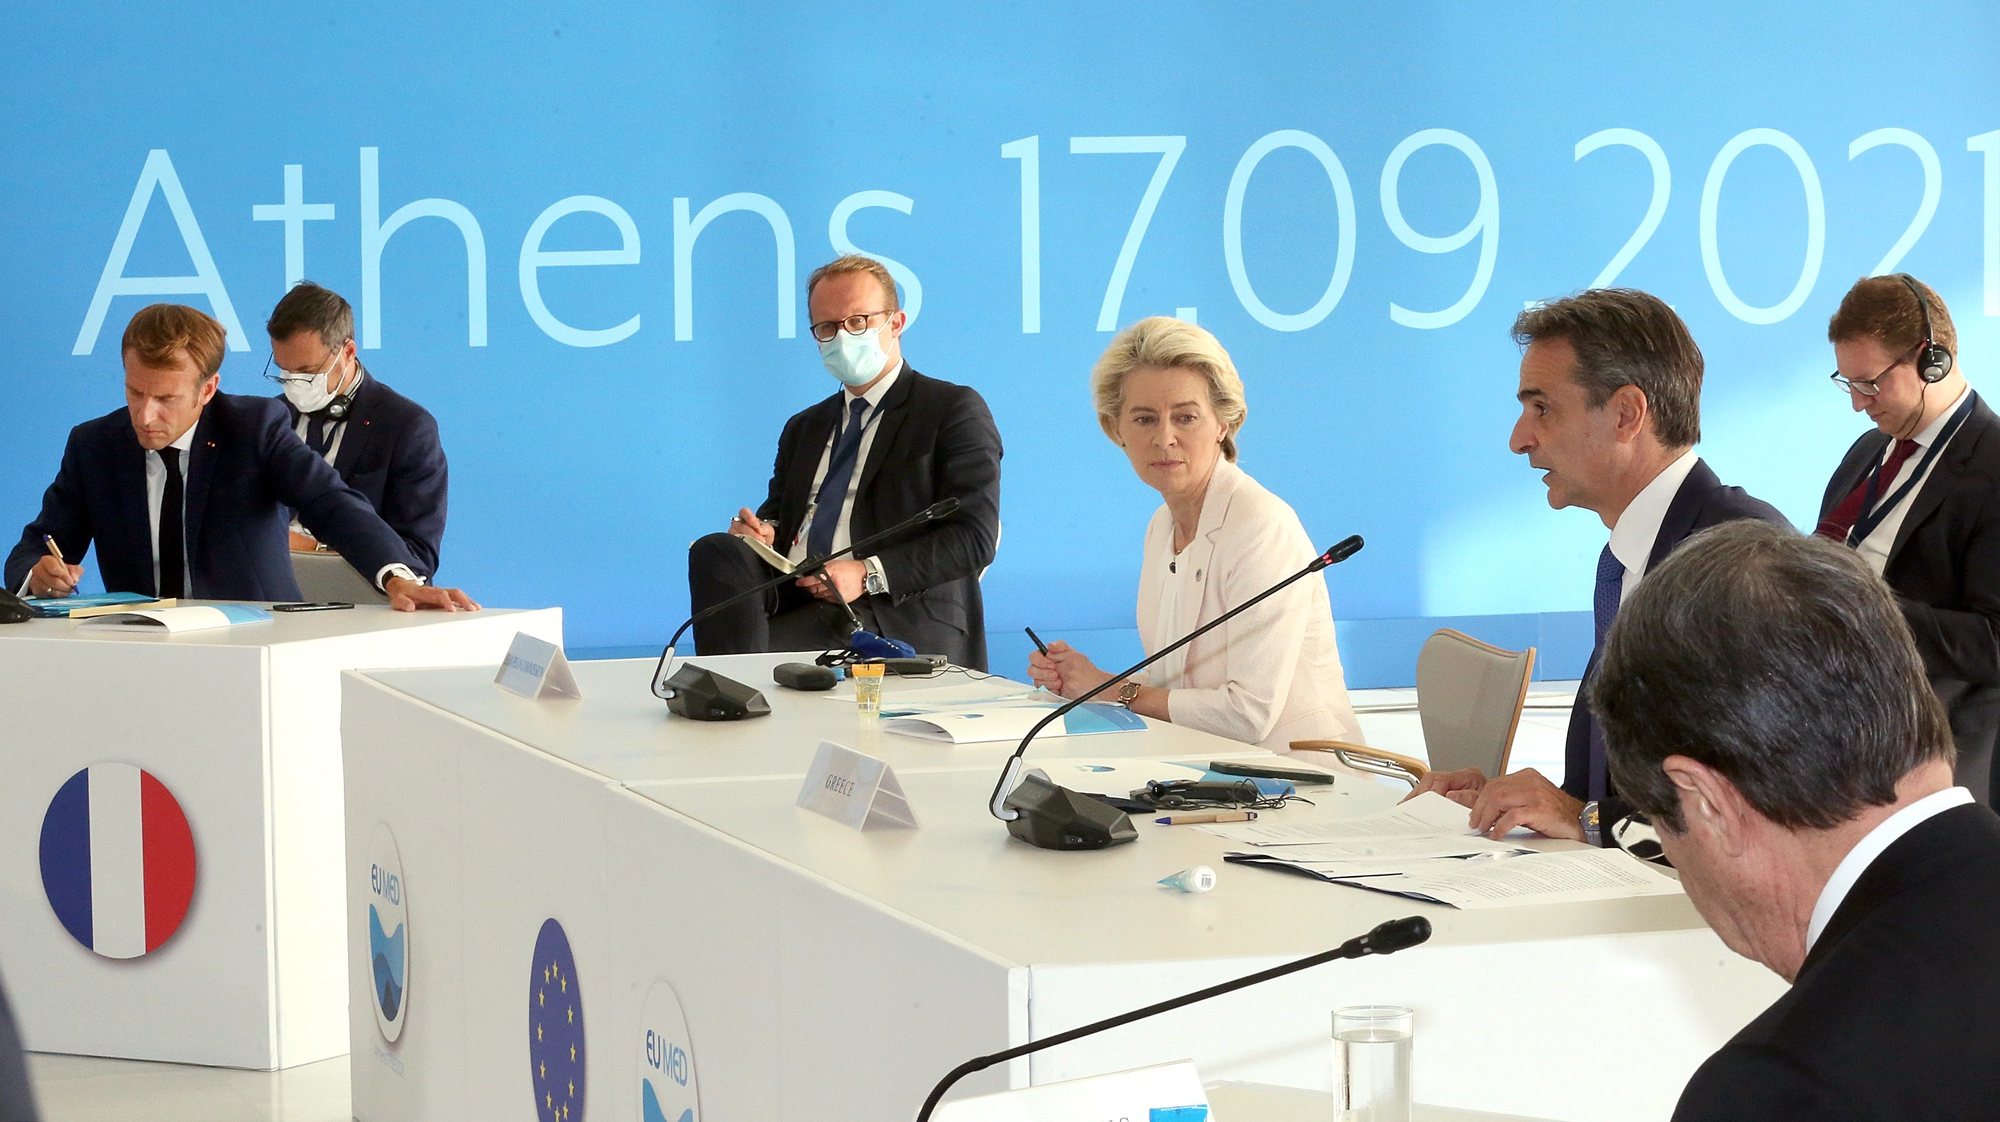 epa09473758 Greek Prime Minister Kyriakos Mitsotakis (R), President of the European Commission Ursula von der Leyen (R2) and French President Emmanuel Macron (L) participate at the EUMed9 Summit, in Athens, Greece, 17 September 2021.The agenda of the Summit, which acquires special geopolitical weight, includes security challenges in the Mediterranean that endanger stability in the region, potential new crises, such as the threat of migration flows after the latest developments in Afghanistan, and other crises, the consequences of which Mediterranean countries are already experiencing, such as climate change.  EPA/ORESTIS PANAGIOTOU